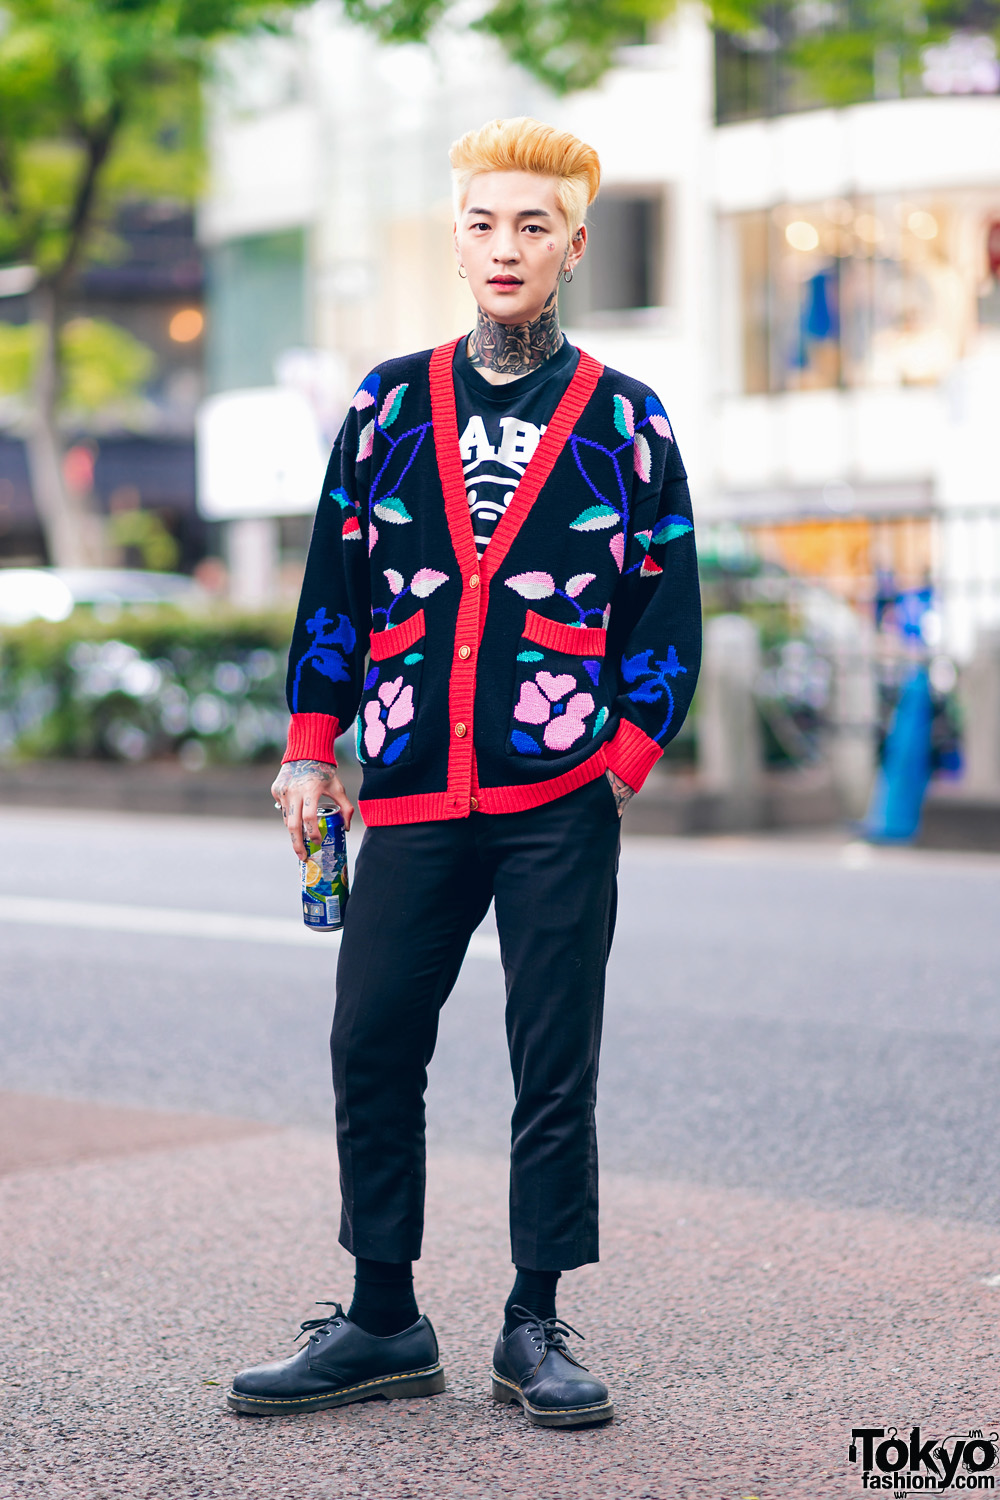 Artist in Harajuku w/ Neck Tattoo, Floral Knit Cardigan, A Bathing Ape, Cropped Pants & Dr. Martens